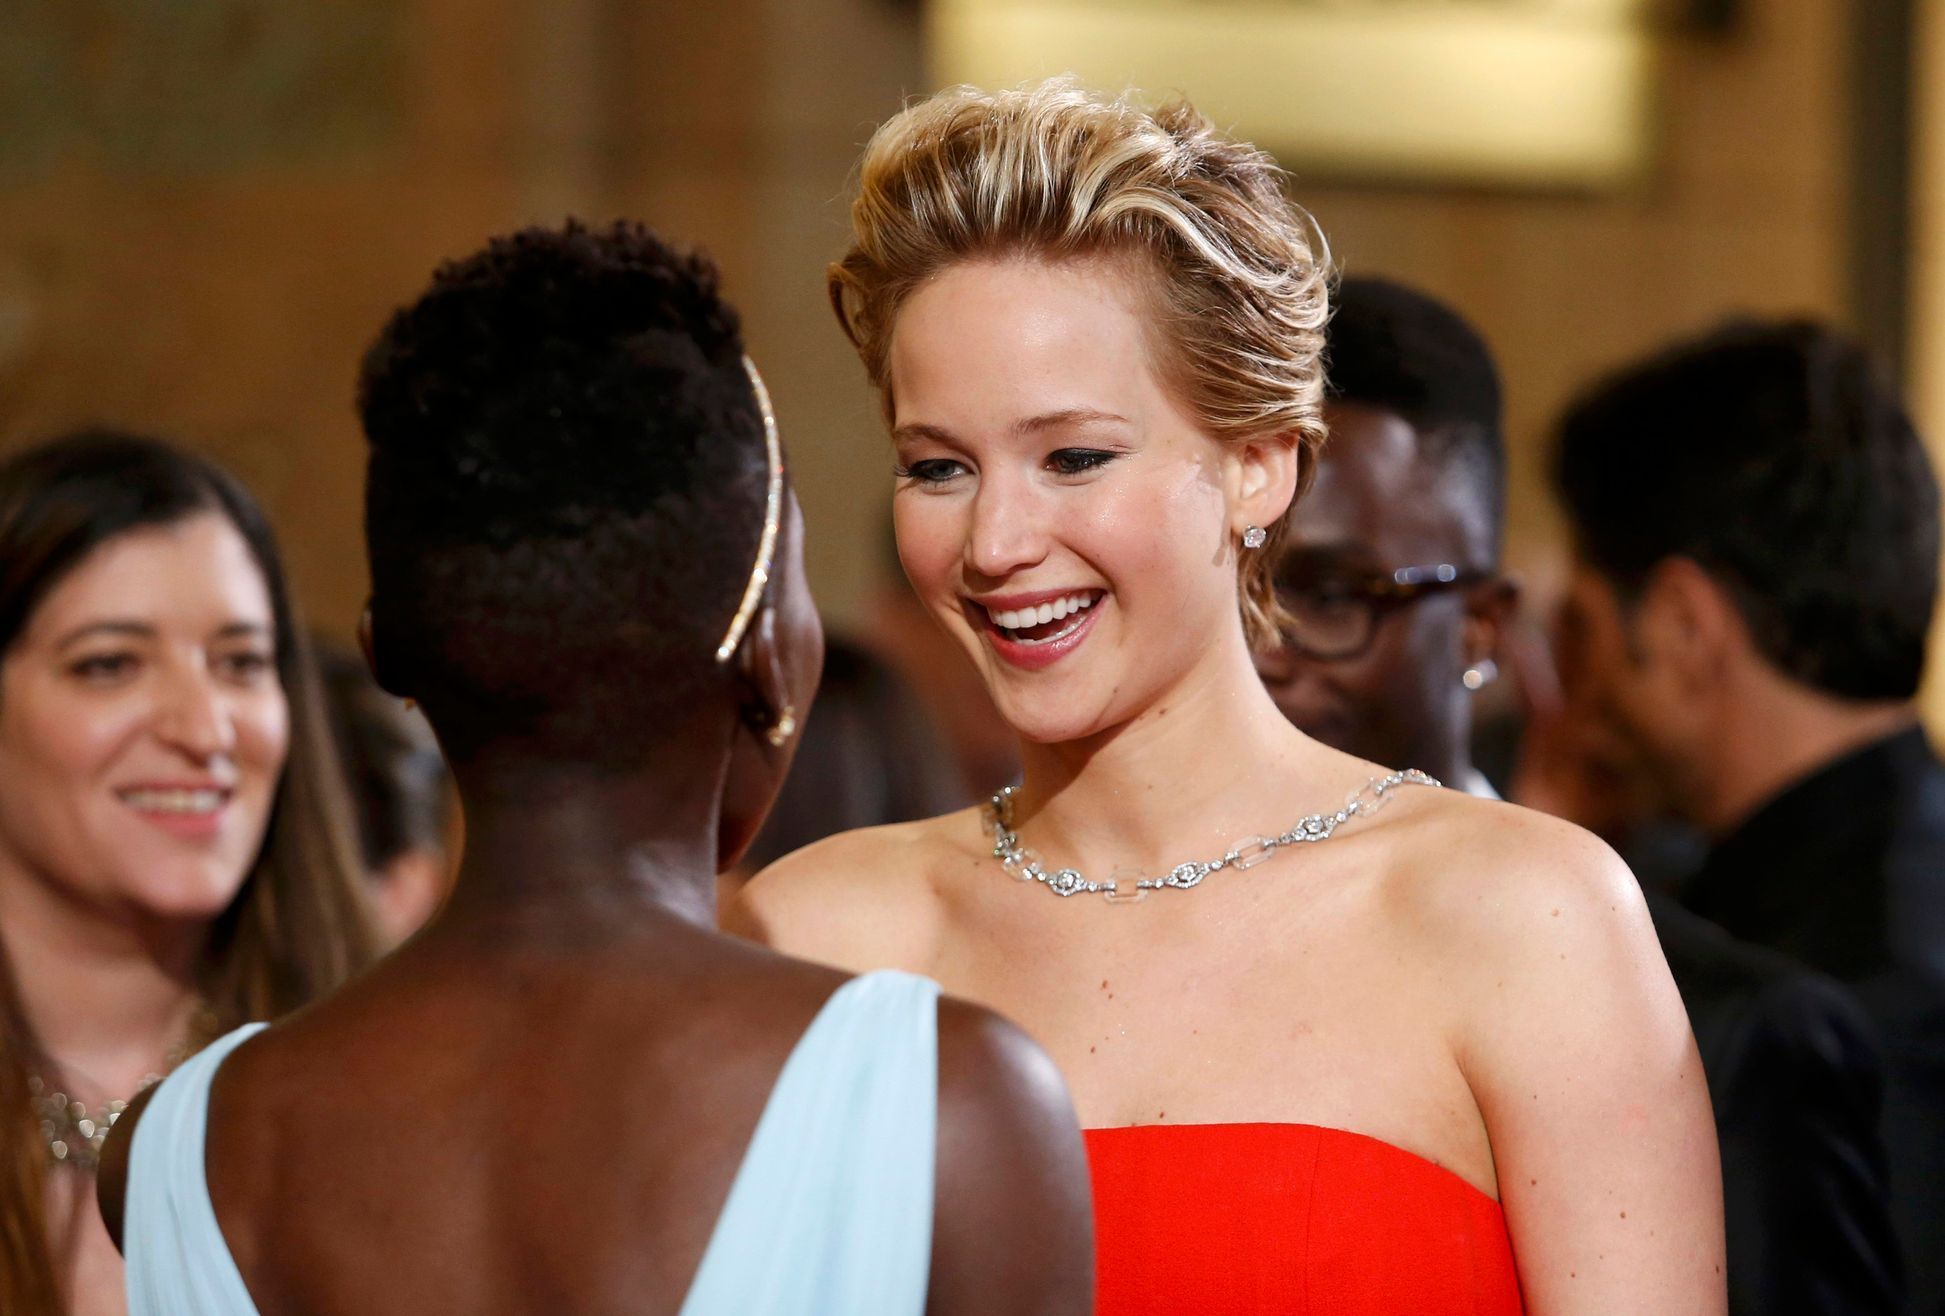 Lawrence talks with Nyong'o at the 86th Academy Awards in Hollywood